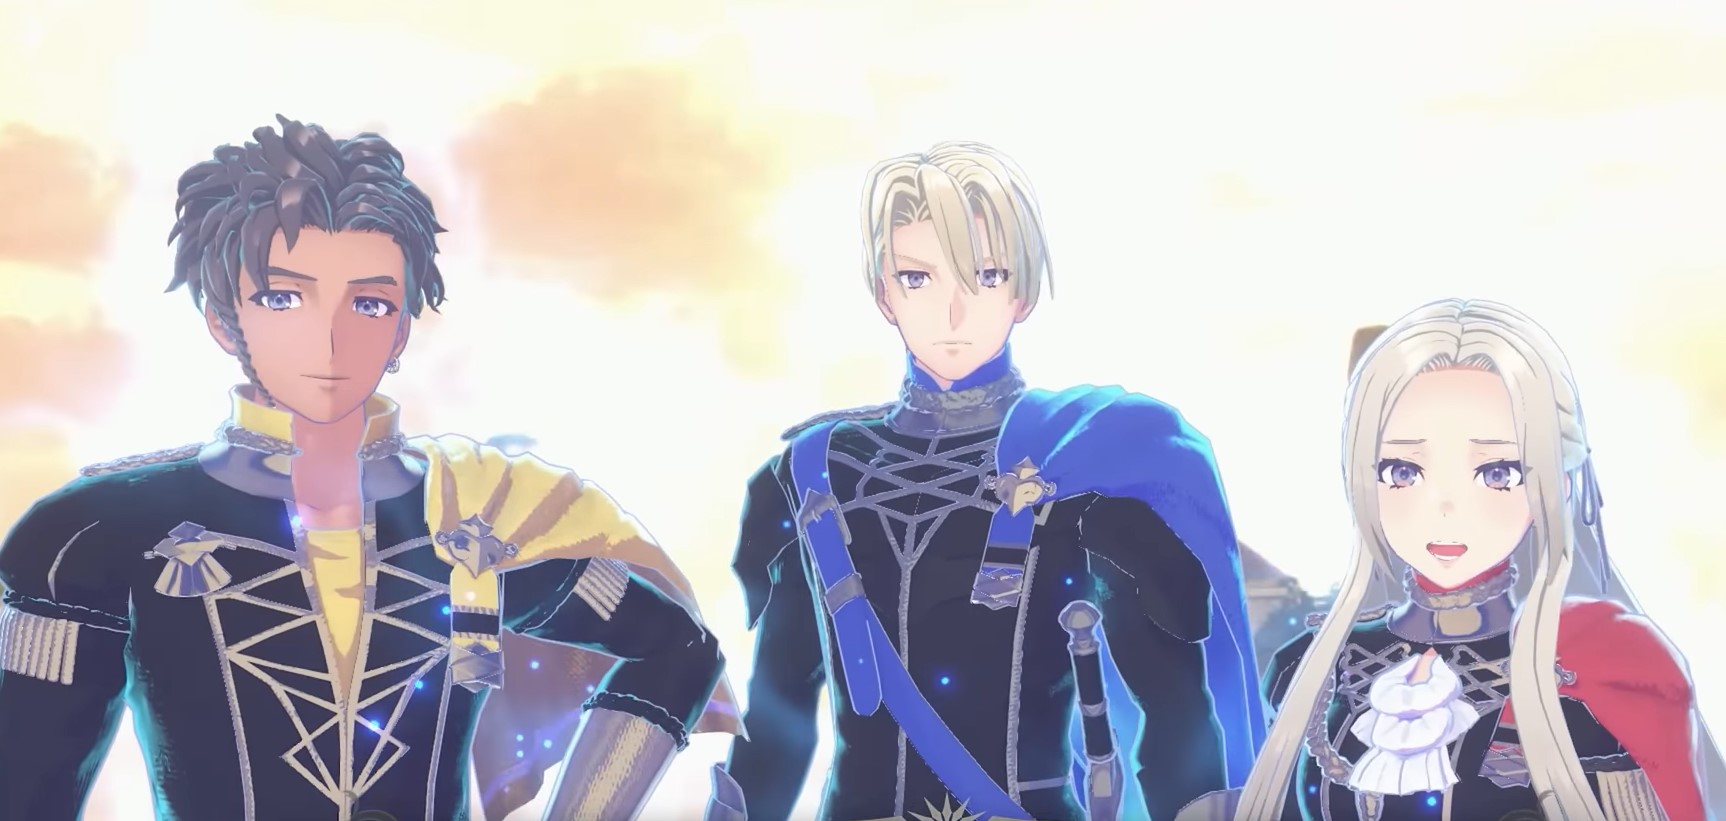 Fire Emblem Engage lookout ridge event - how to unlock characters Edelgard, Dimitri, and Claude talking in cutscene